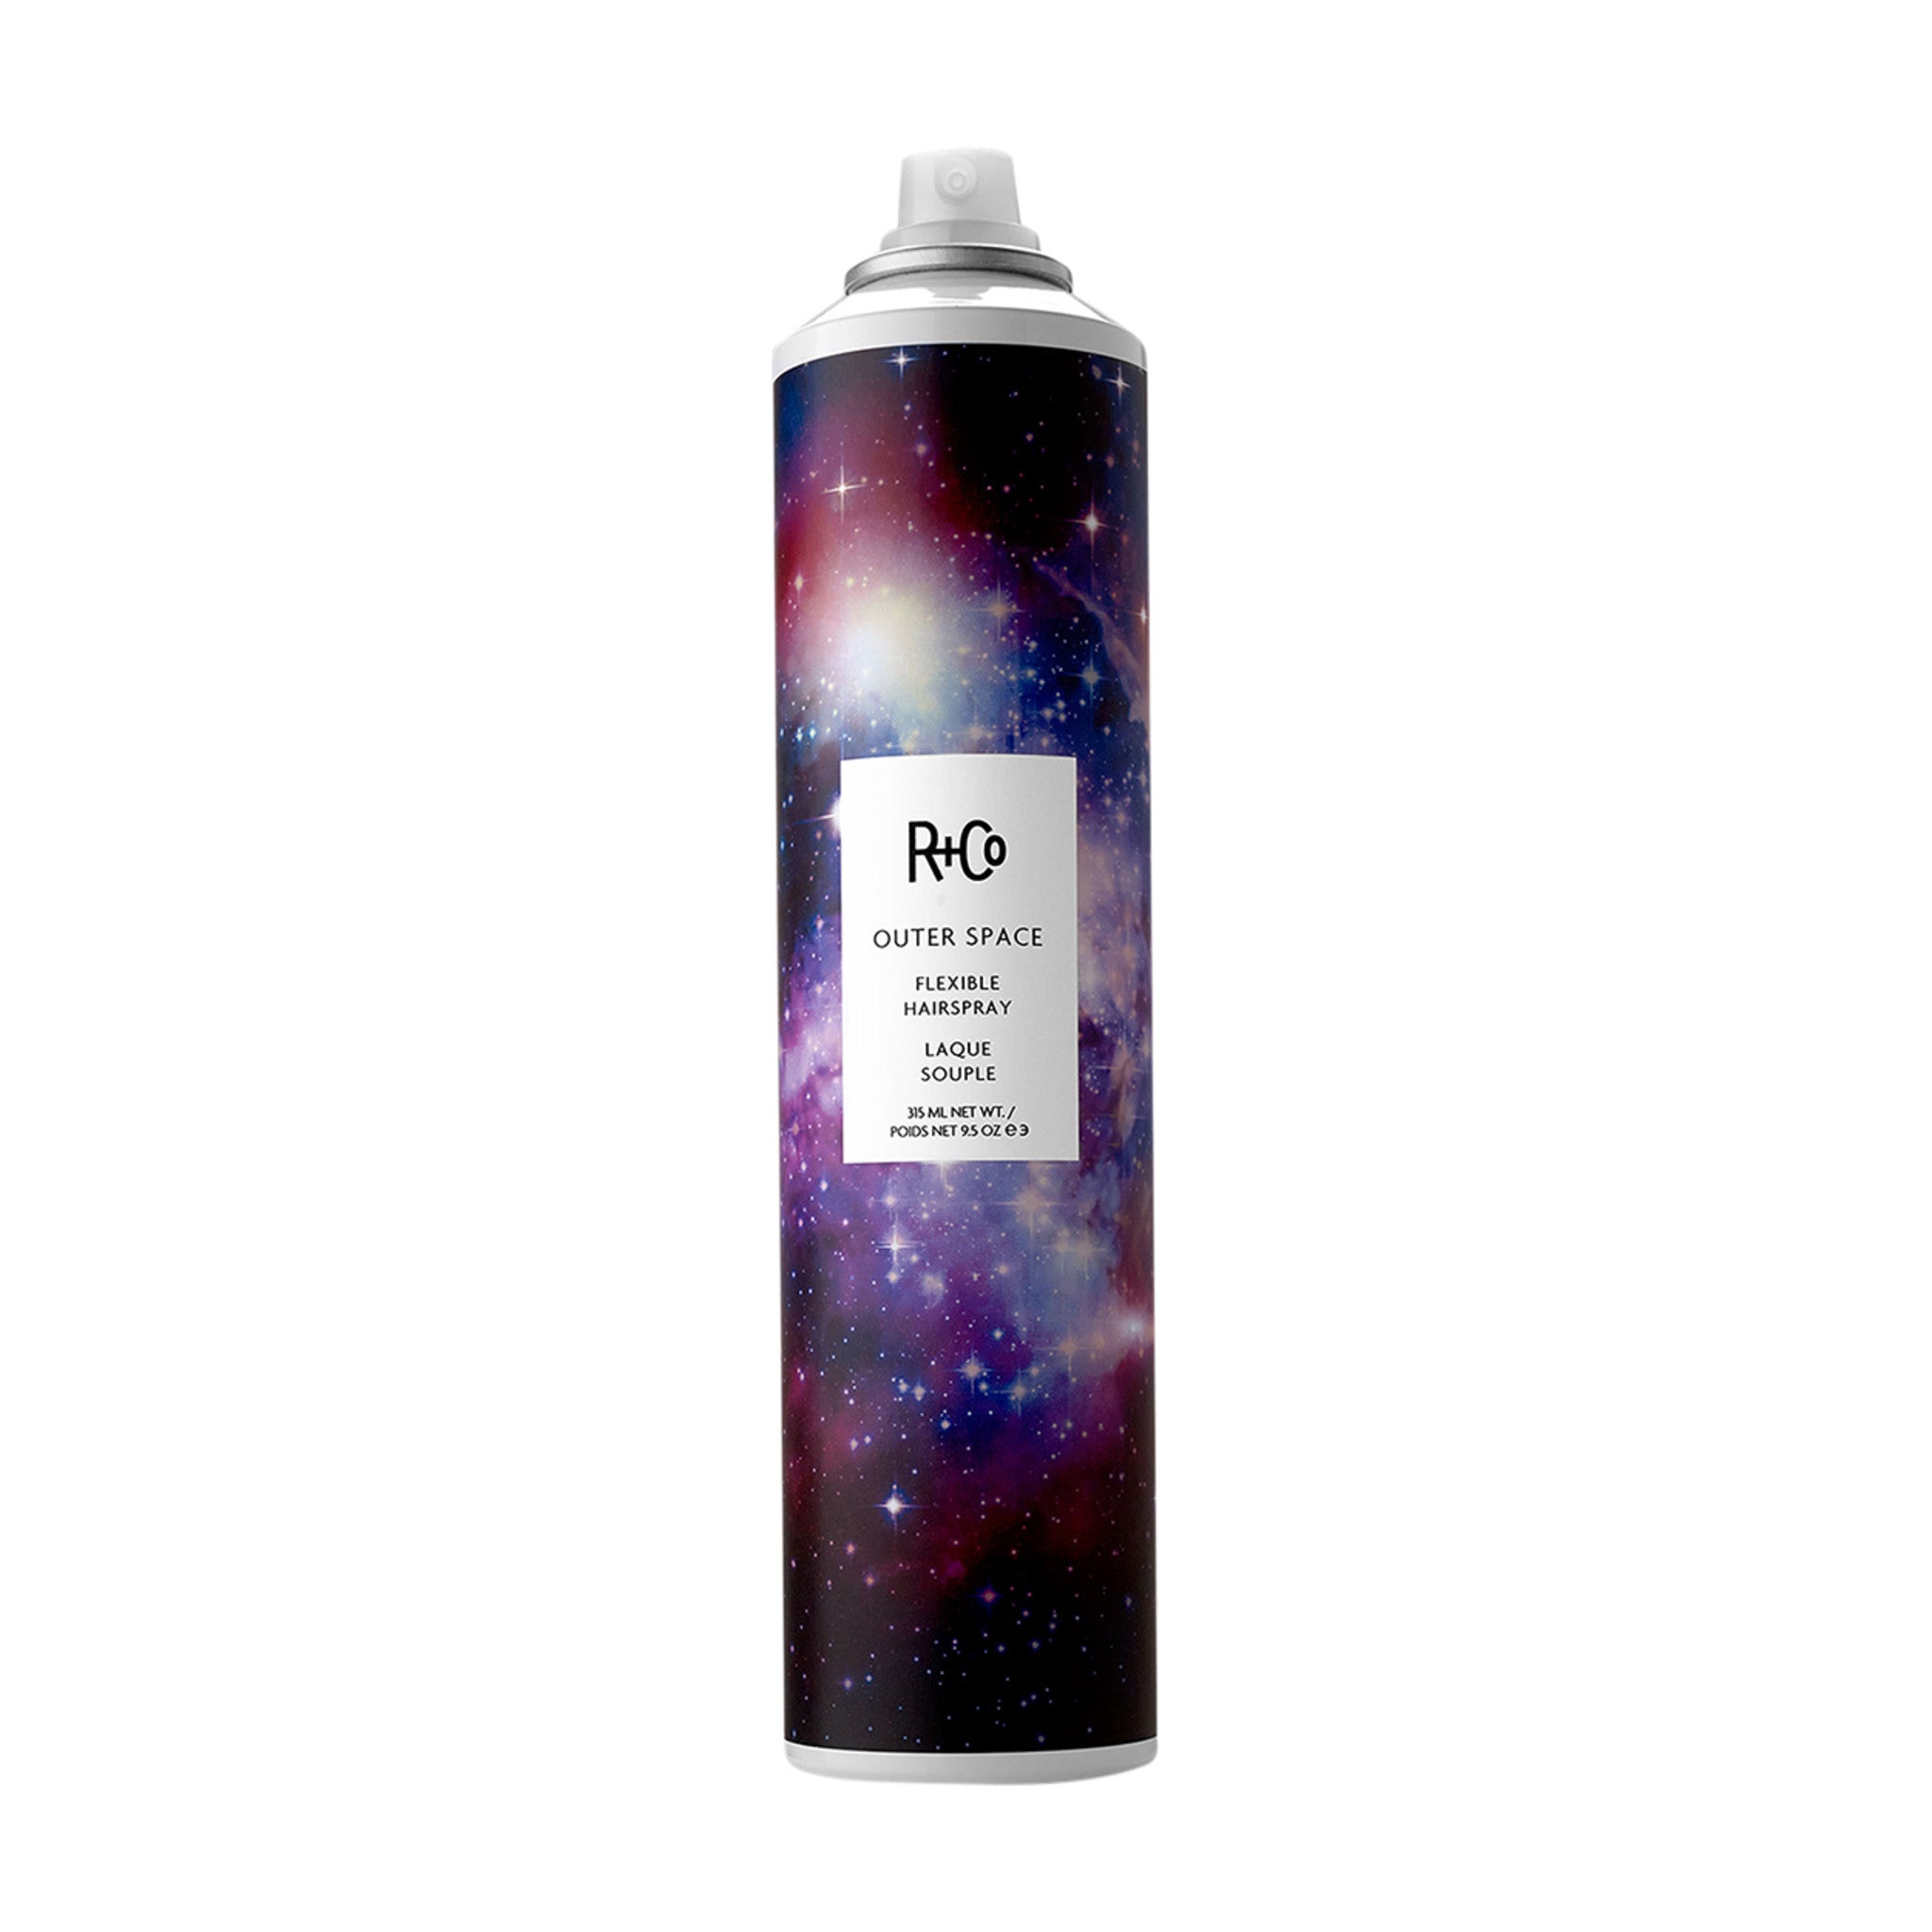 R+Co Outer Space Flexible Hairspray Size variant: 9.5 fl oz main image.